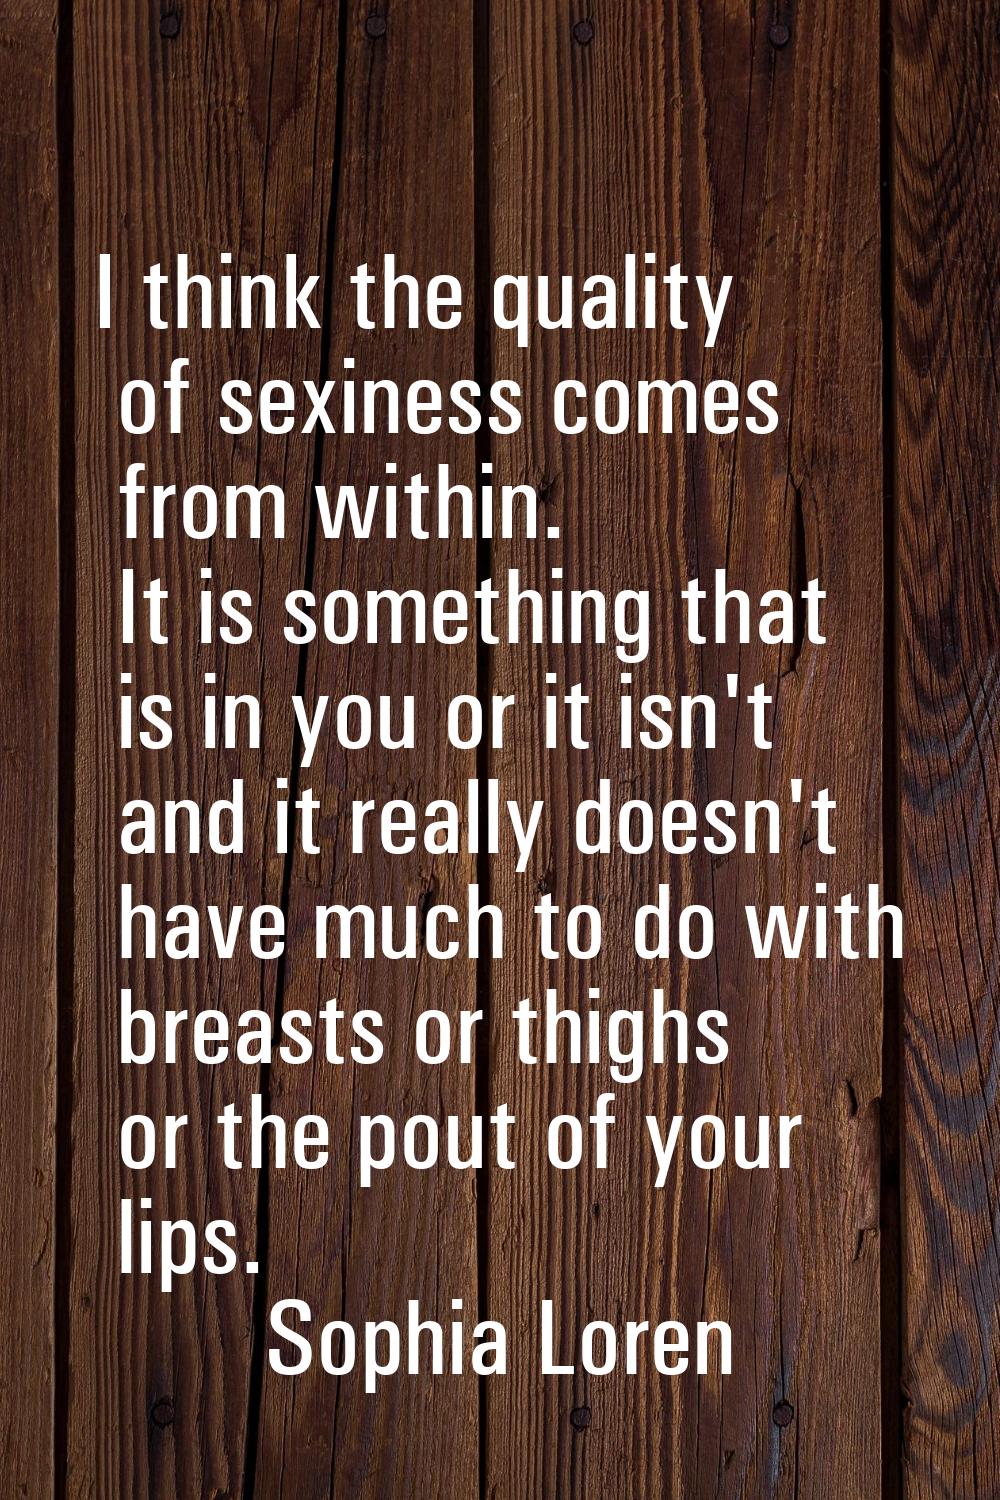 I think the quality of sexiness comes from within. It is something that is in you or it isn't and i